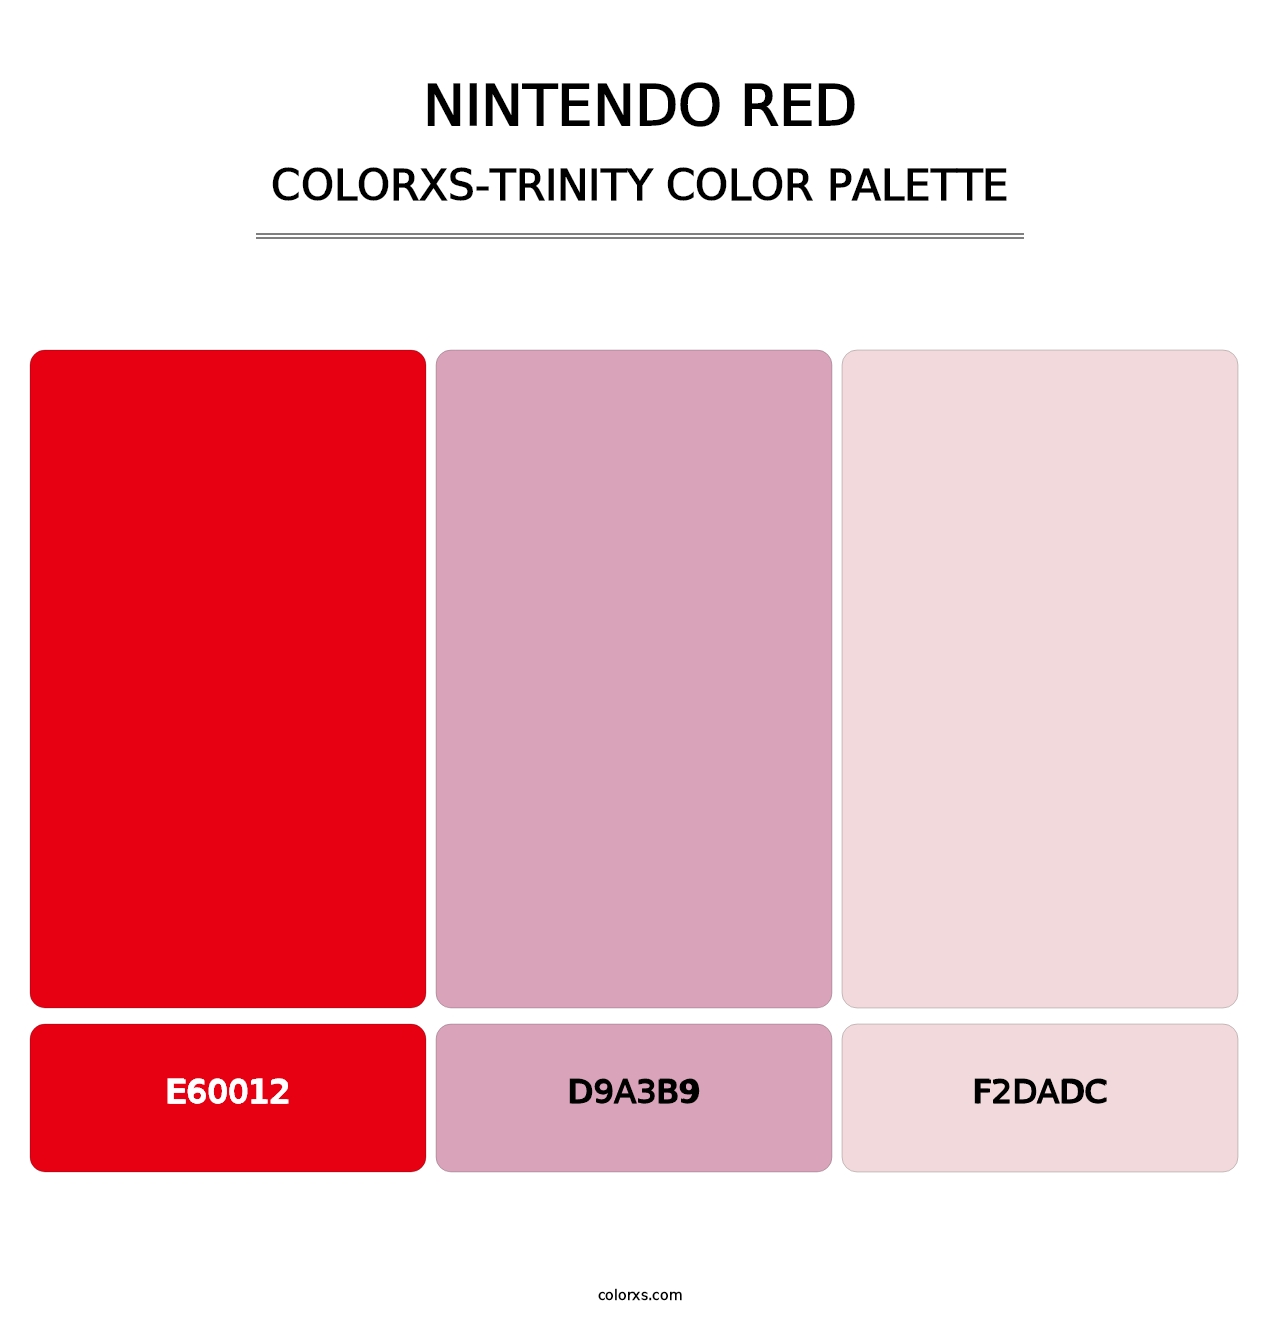 Nintendo Red - Colorxs Trinity Palette